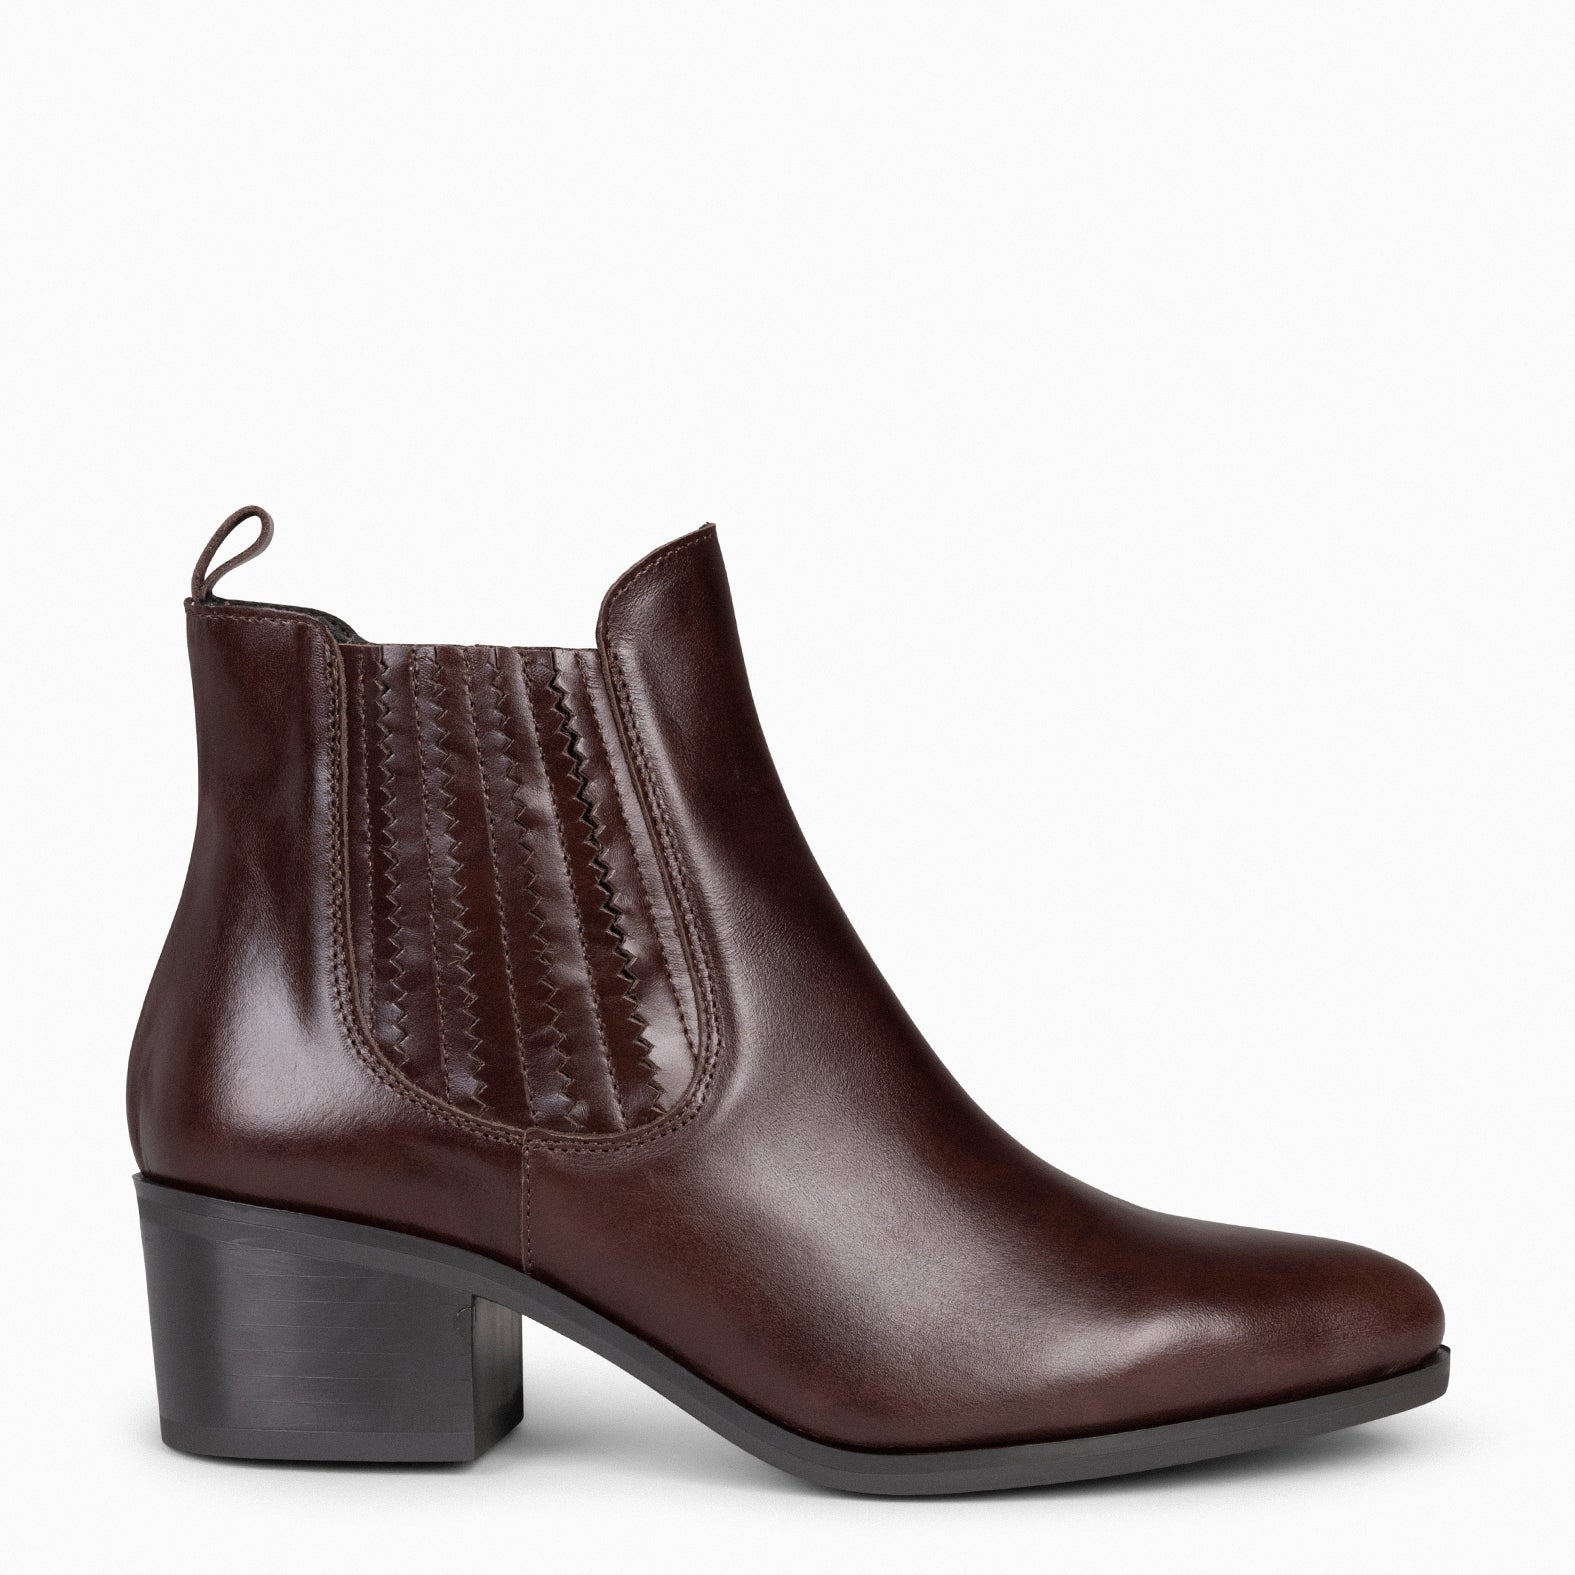 SHELLY – BROWN Country Women  Booties